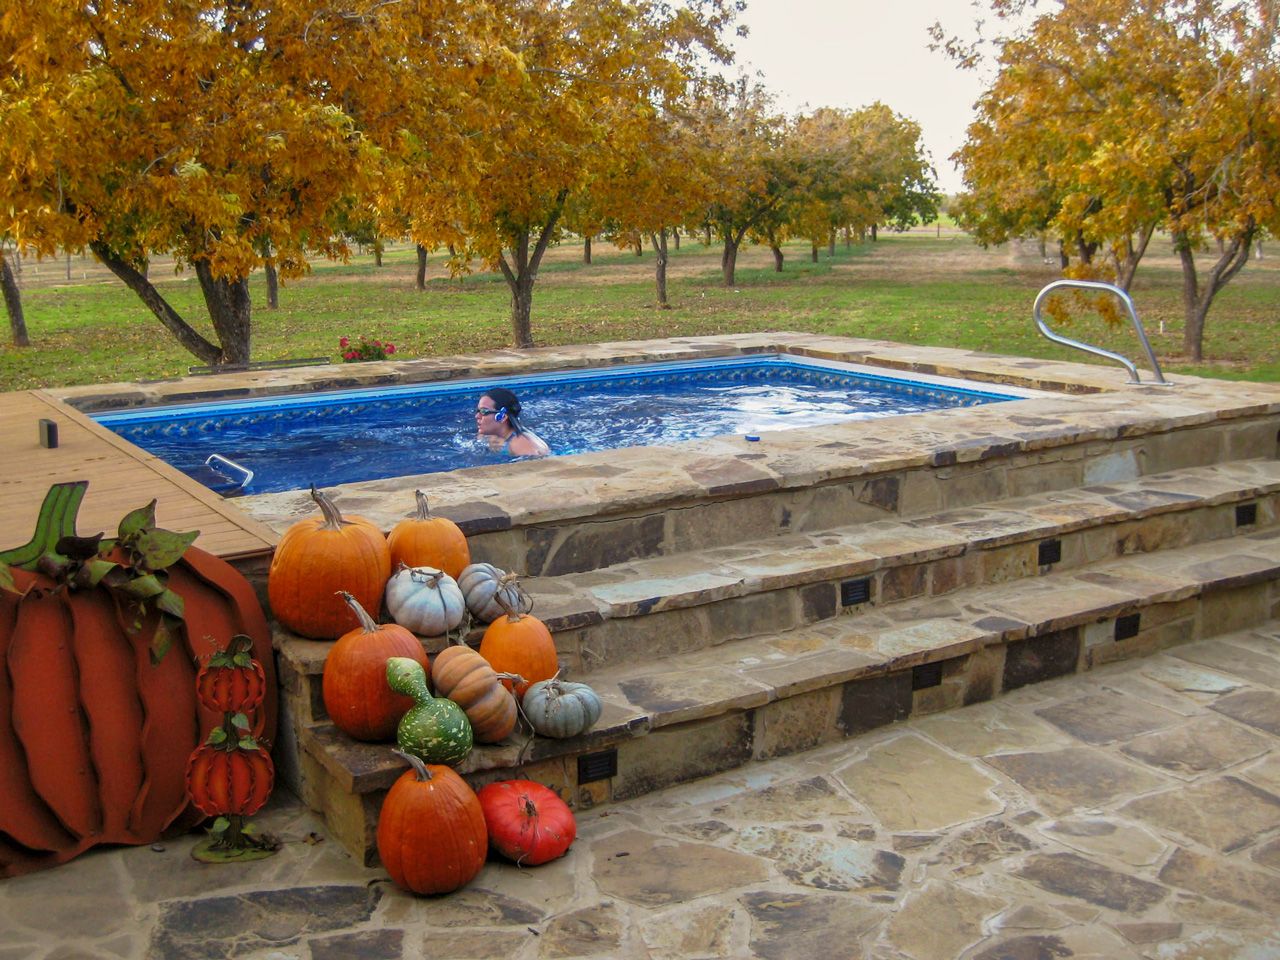 A picture of an outdoor pool in autumn, surrounding by trees losing their leaves and pumpkins.